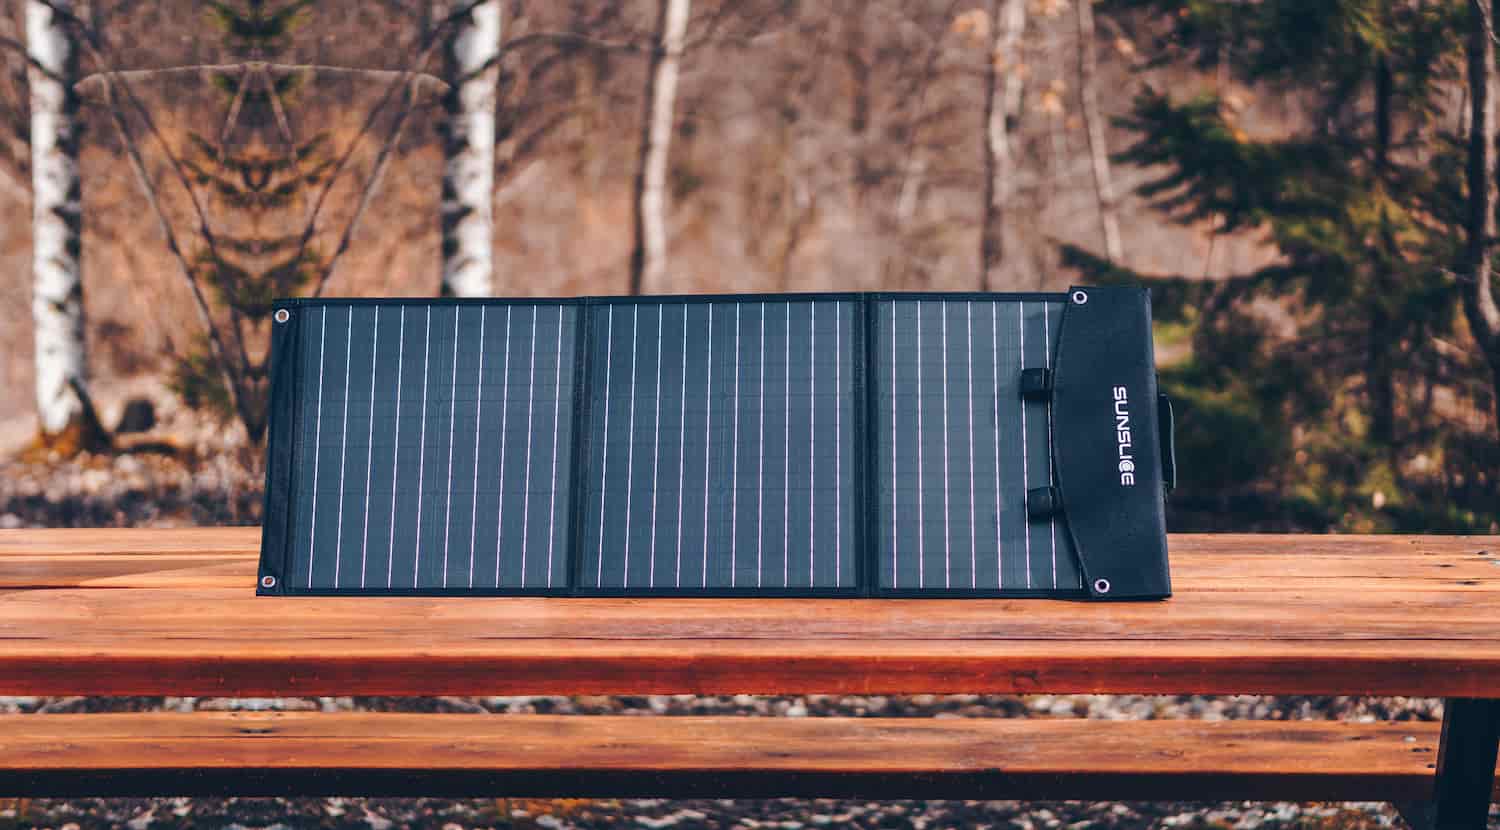 portable solar panel for camping on a table in the middle of the forest